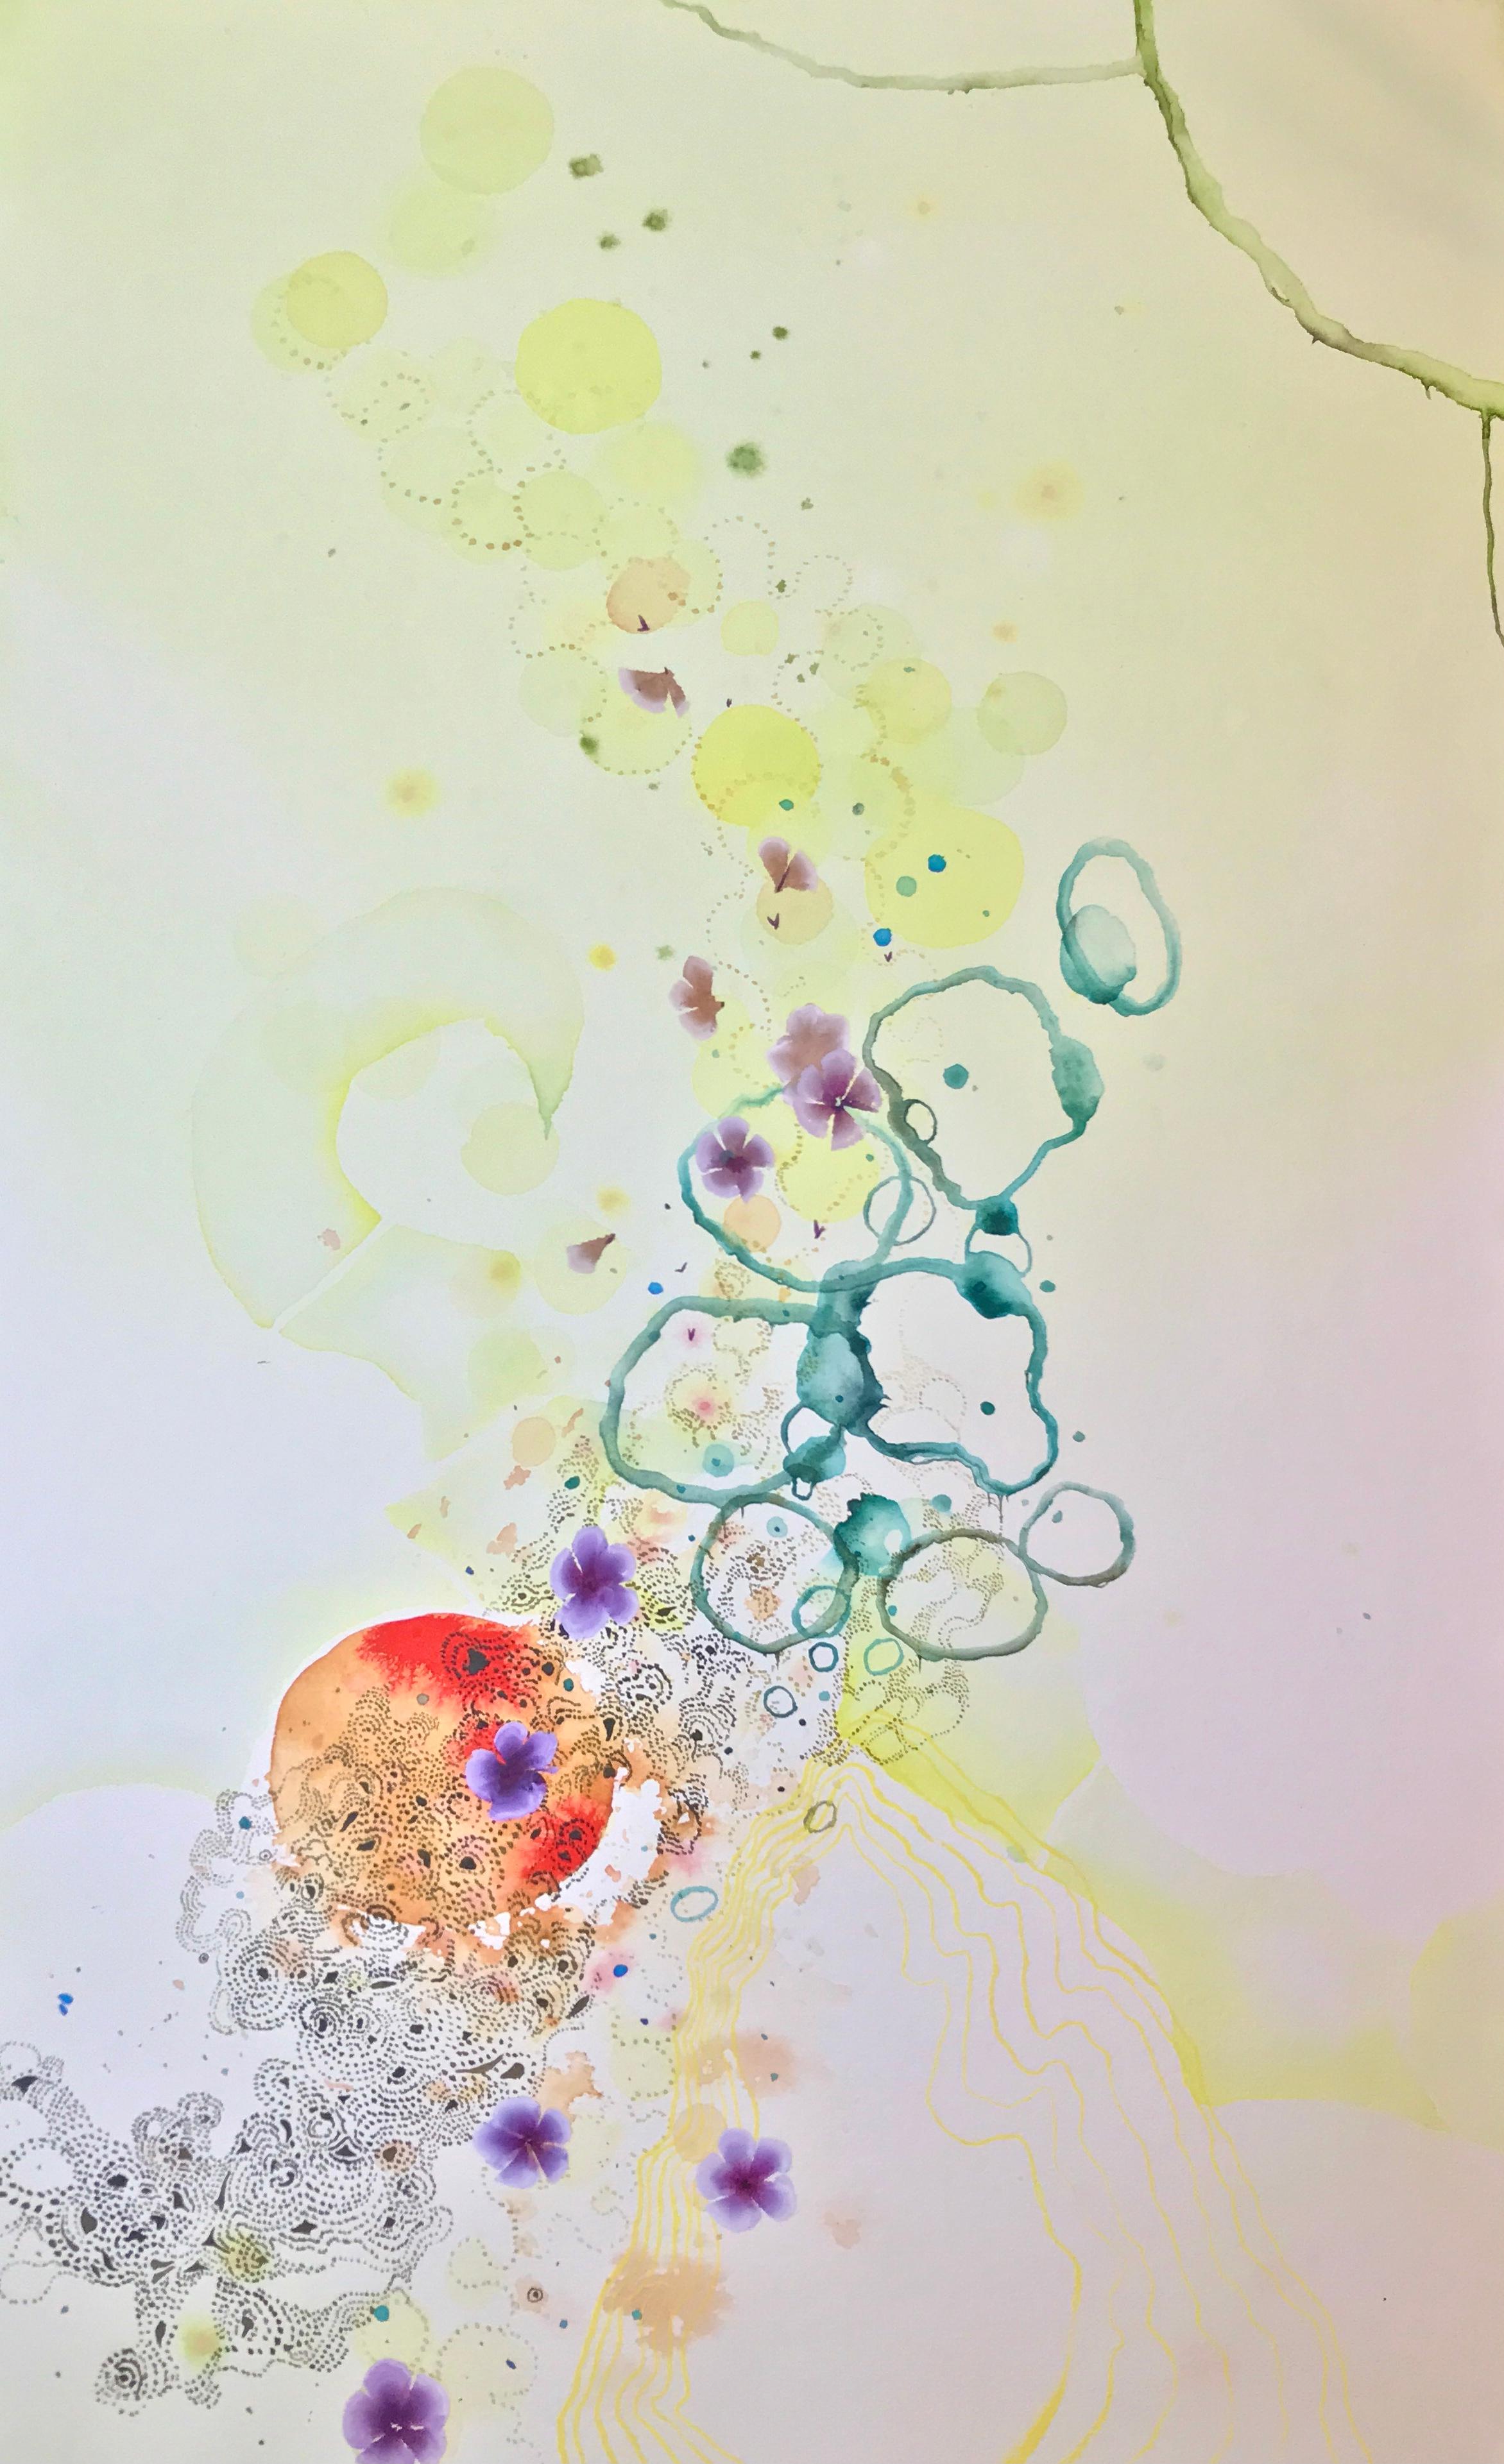 Grayson Chandler Abstract Drawing - "Amino", Watercolor, Abstract, Contemporary Art, Emerging Artist, Houston, Texas